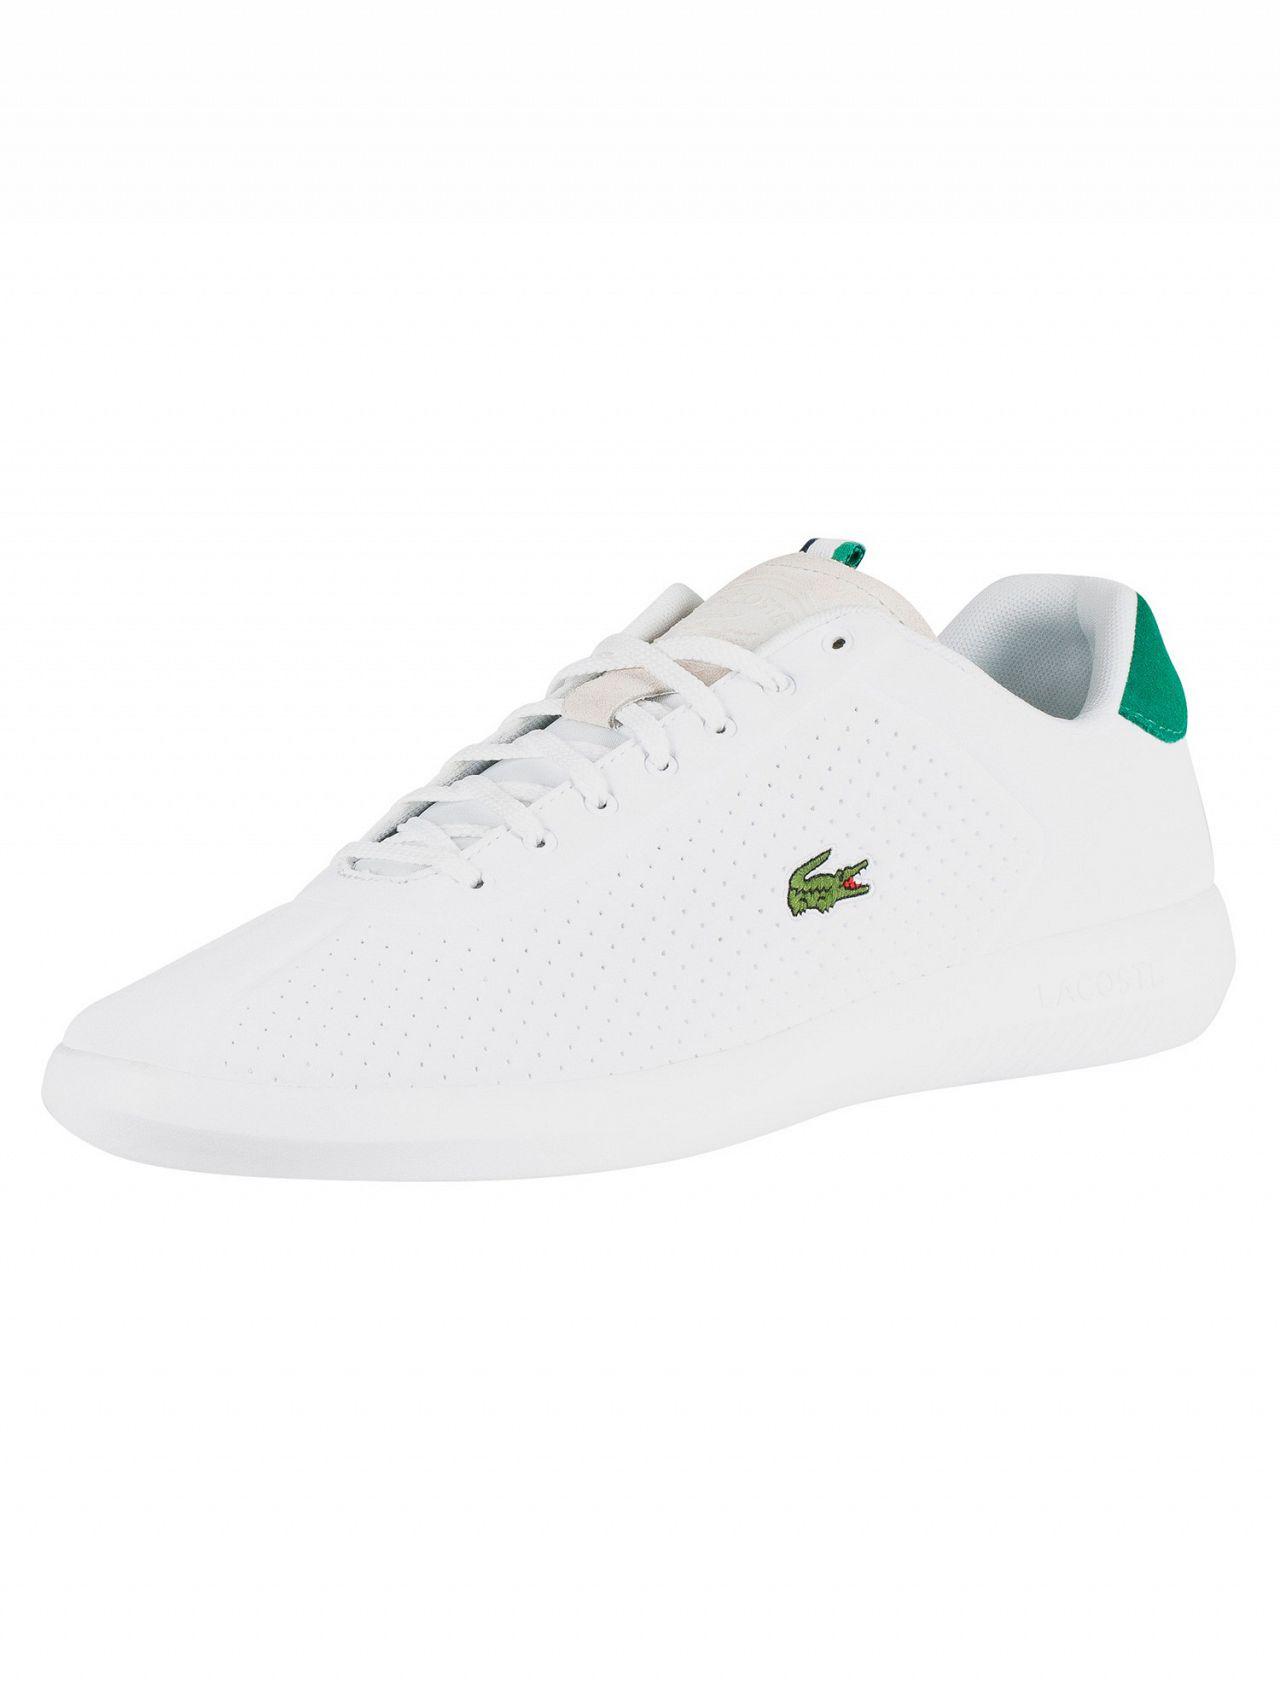 Lacoste Synthetic Avance Trainers White 11 Uk for Men - Lyst